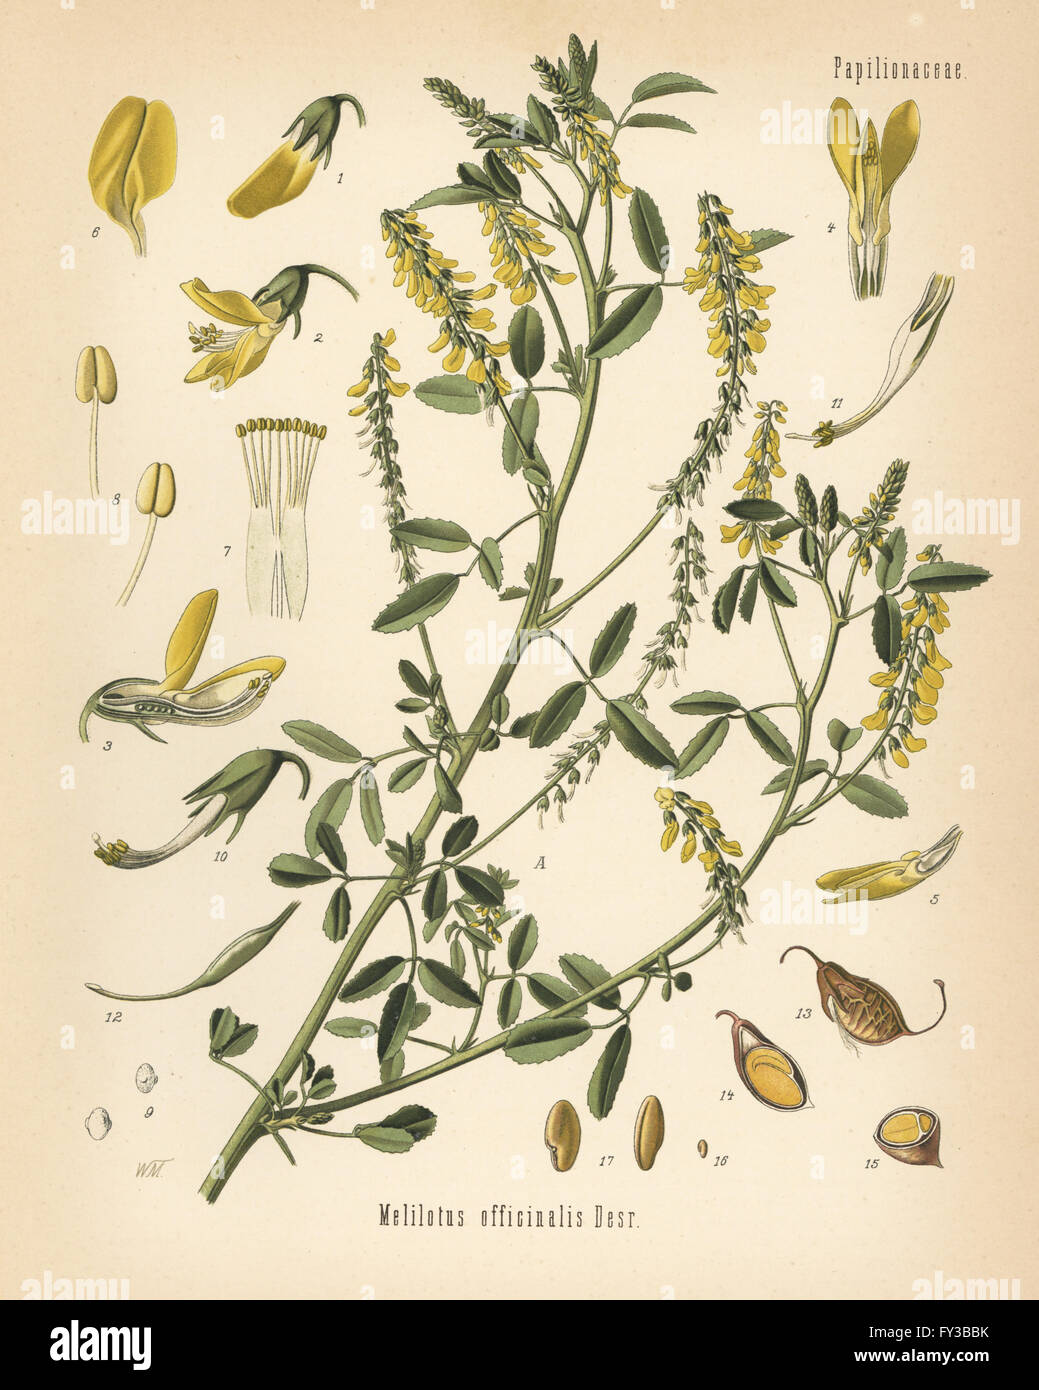 Tall yellow sweetclover or tall melilot, Melilotus altissimus (Melilotus officinalis). Chromolithograph after a botanical illustration from Hermann Adolph Koehler's Medicinal Plants, edited by Gustav Pabst, Koehler, Germany, 1887. Stock Photo